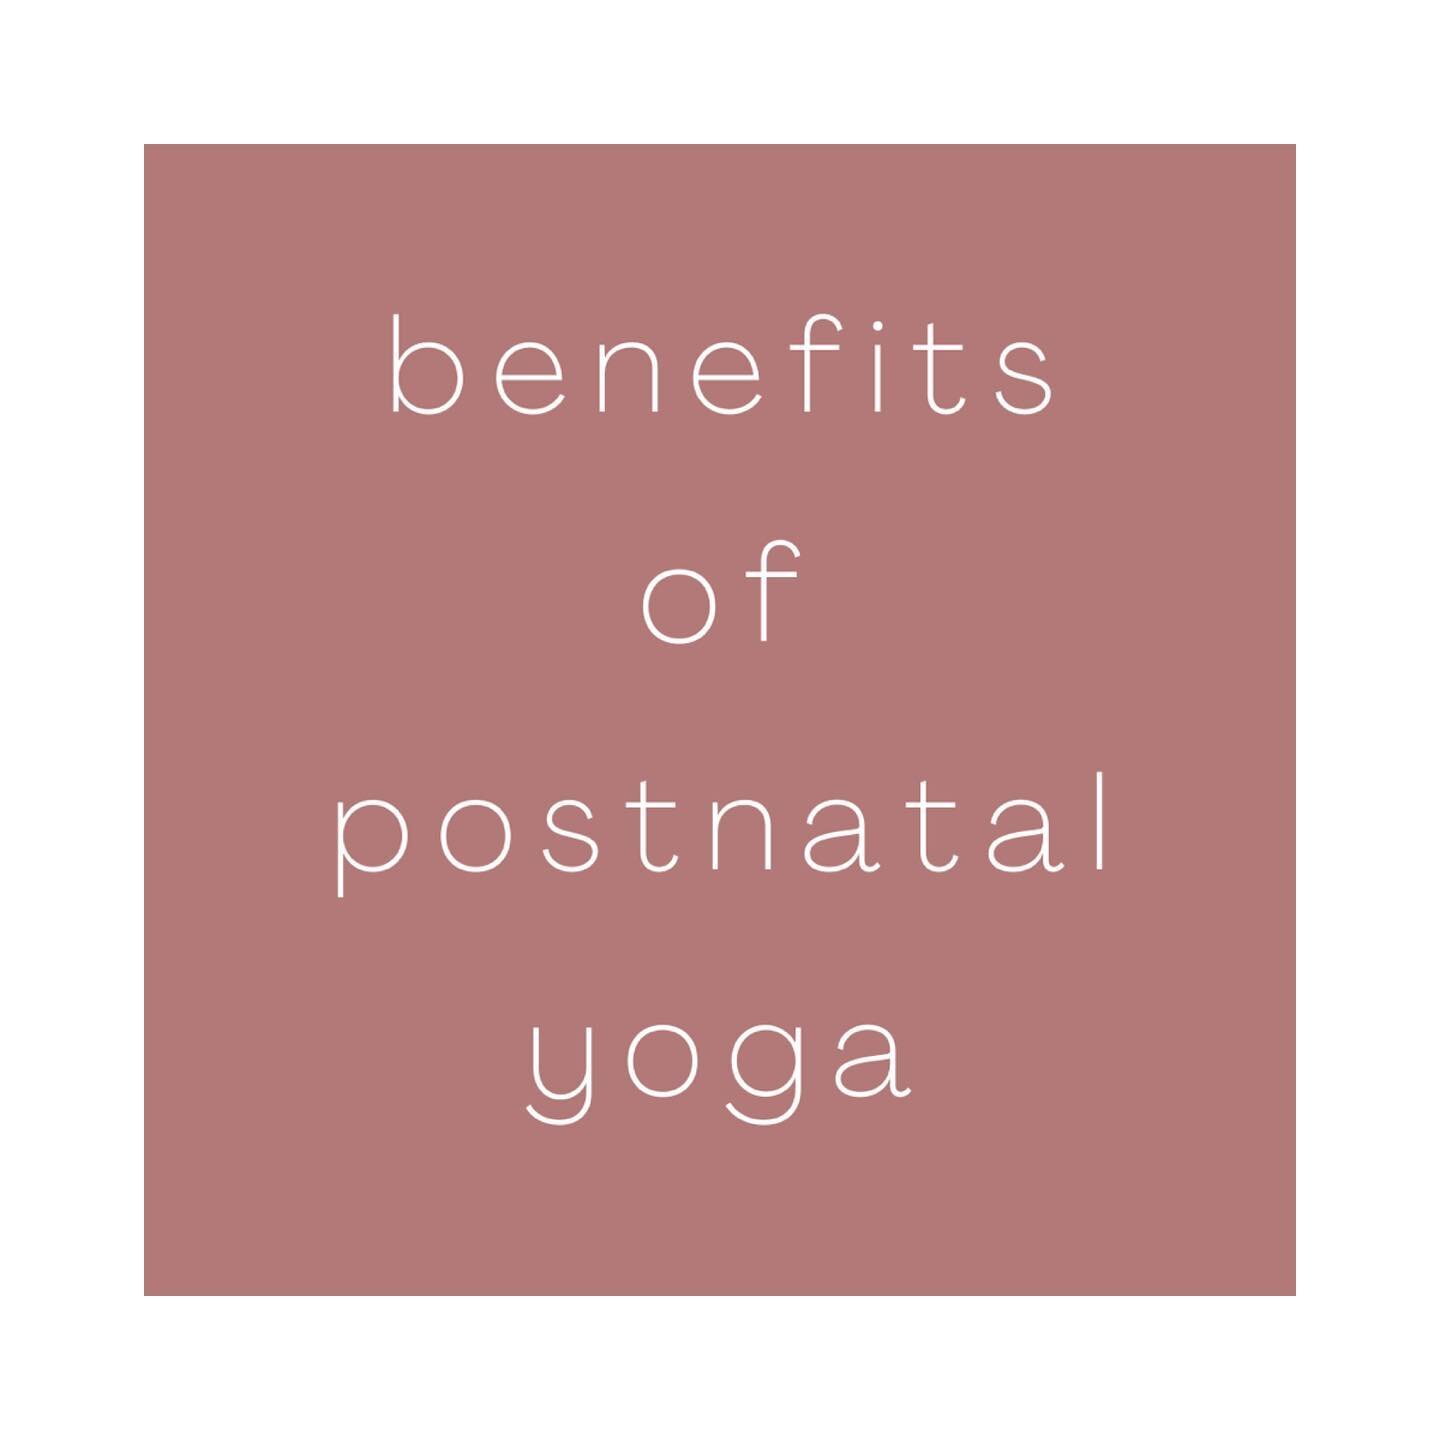 Some of the benefits of a postnatal yoga class are
1 - gently increased strength and mobility after pregnancy. The pelvic floor will be worked and muscles will be toned. 
2 - some time for the mum to relax and take care of herself. Gentle stretching 